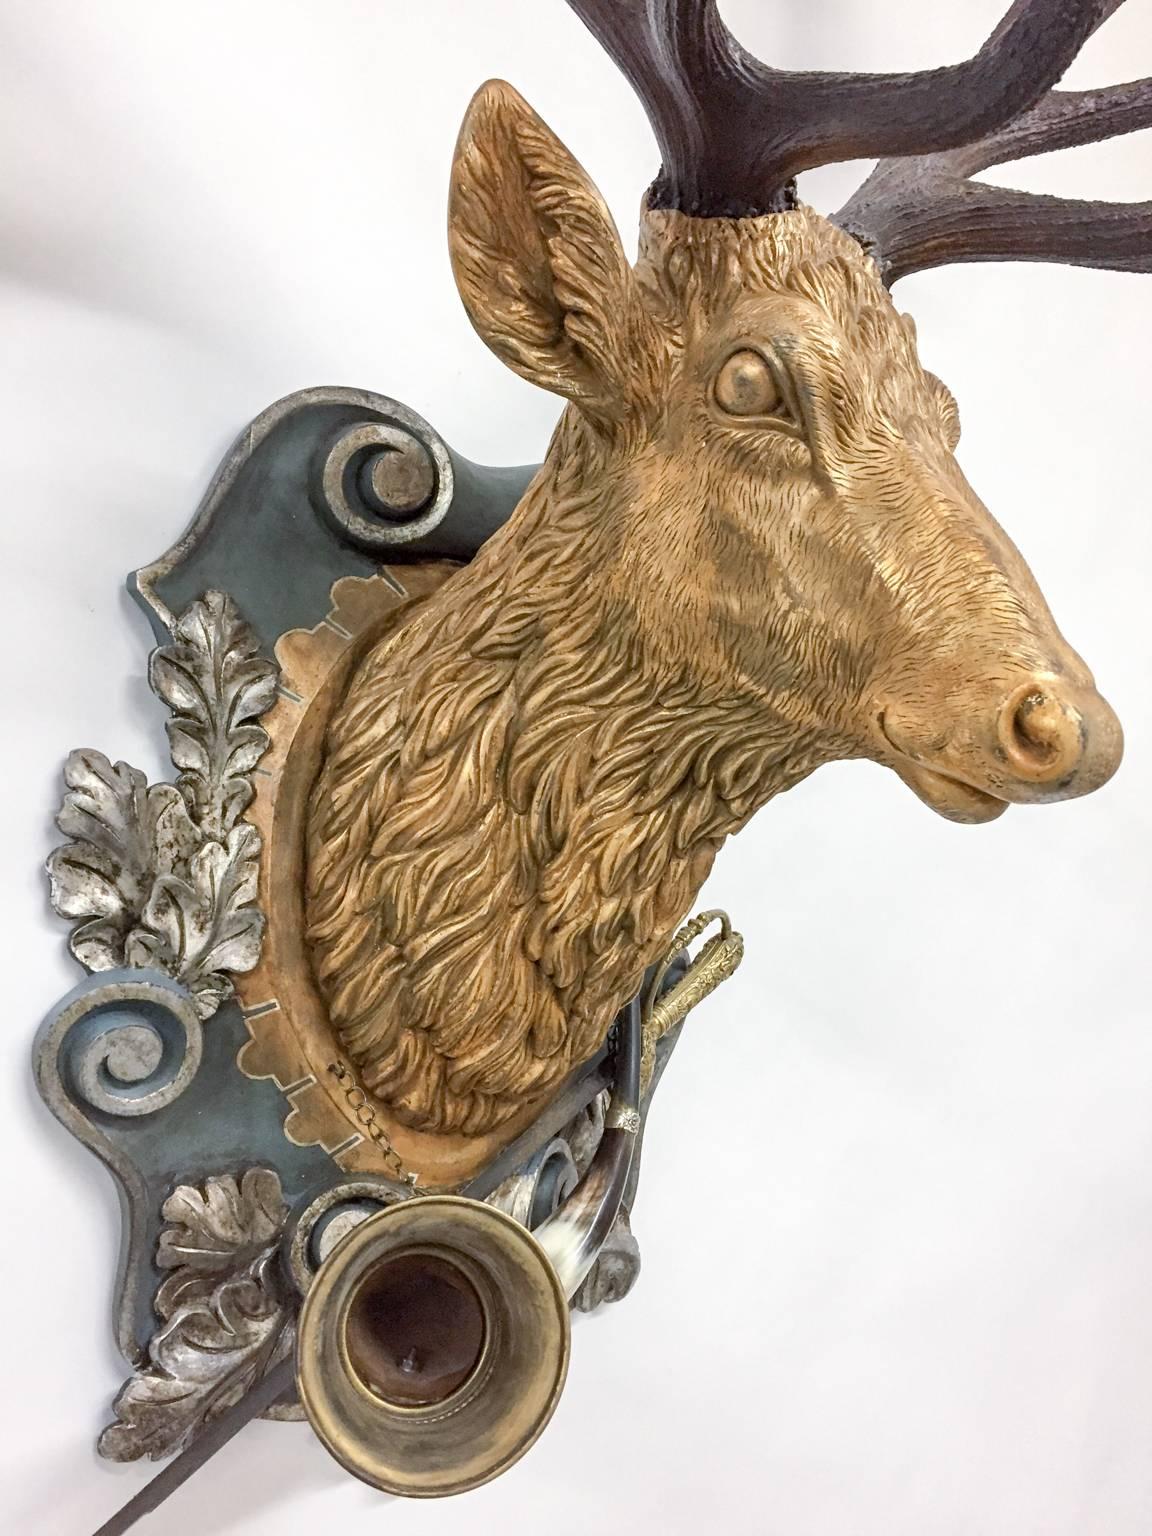 Austrian 19th Century Habsburg Red Stag Trophy with Hunt Horn & Hunt Sword